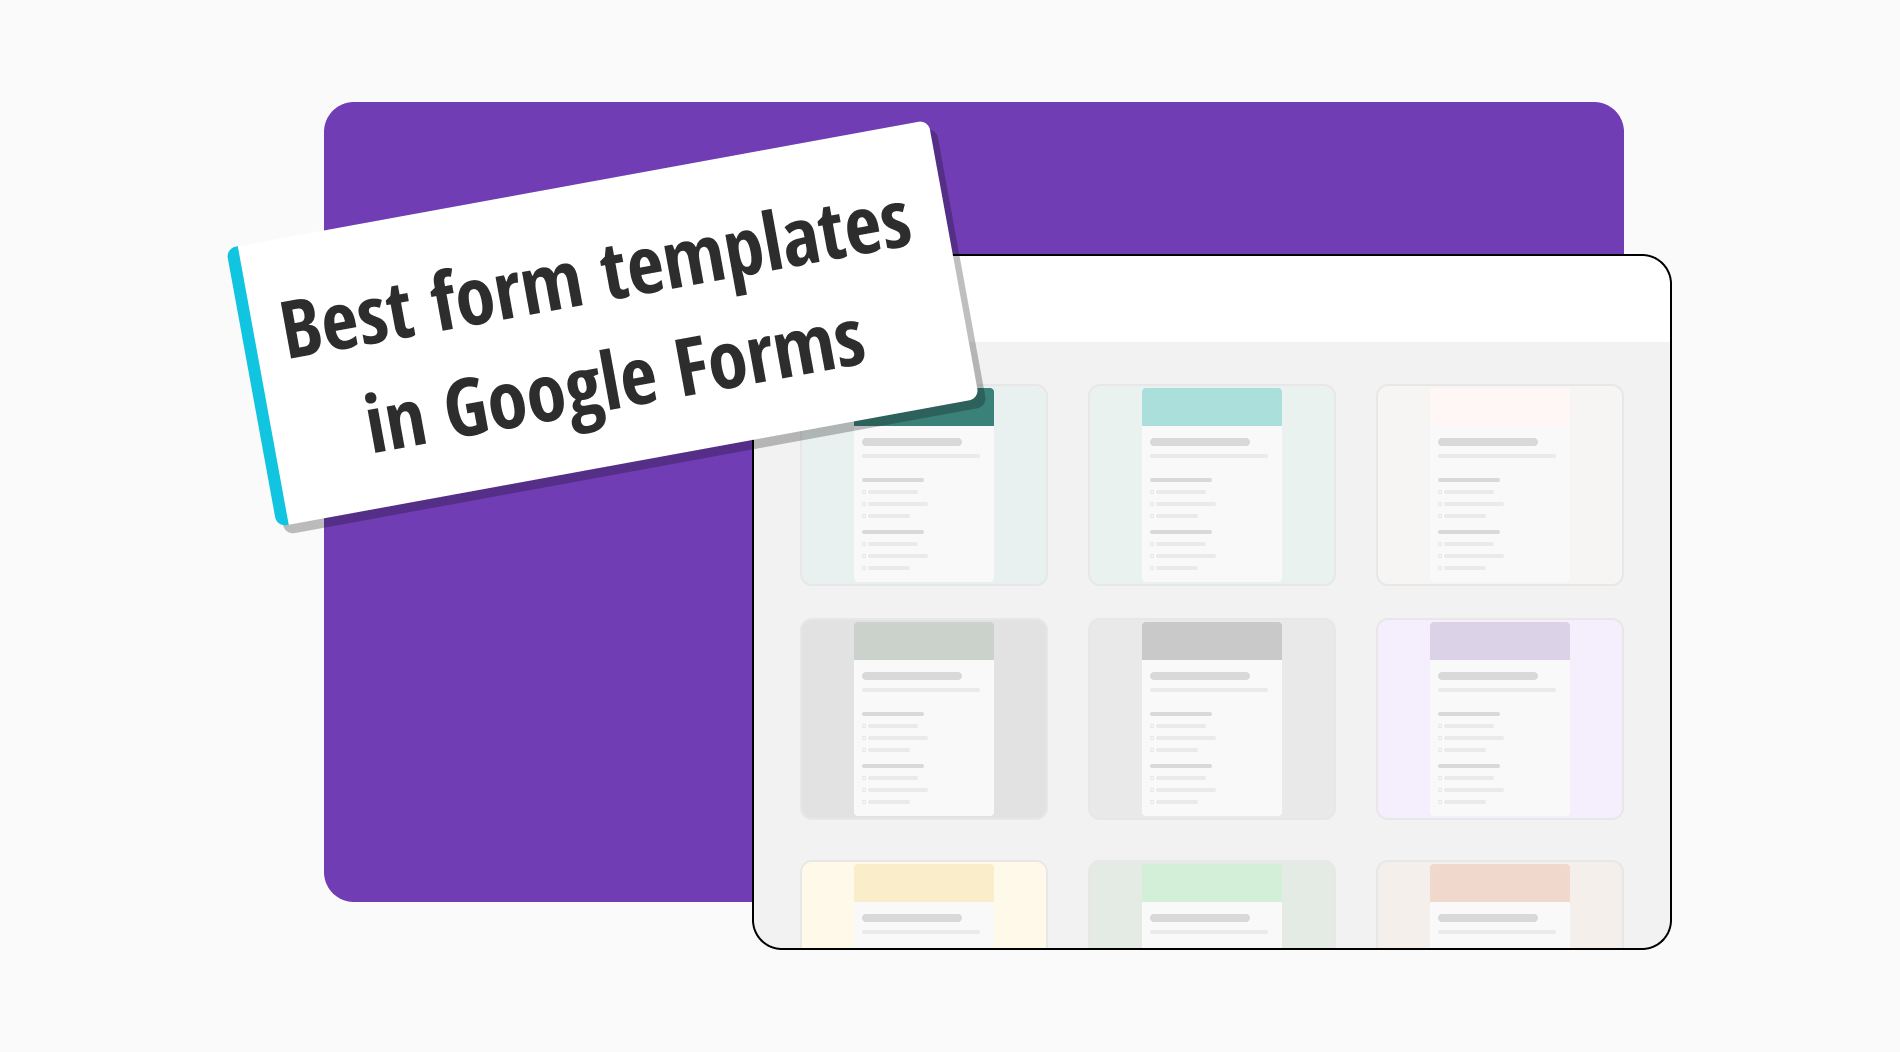 10 Best form templates in Google Forms